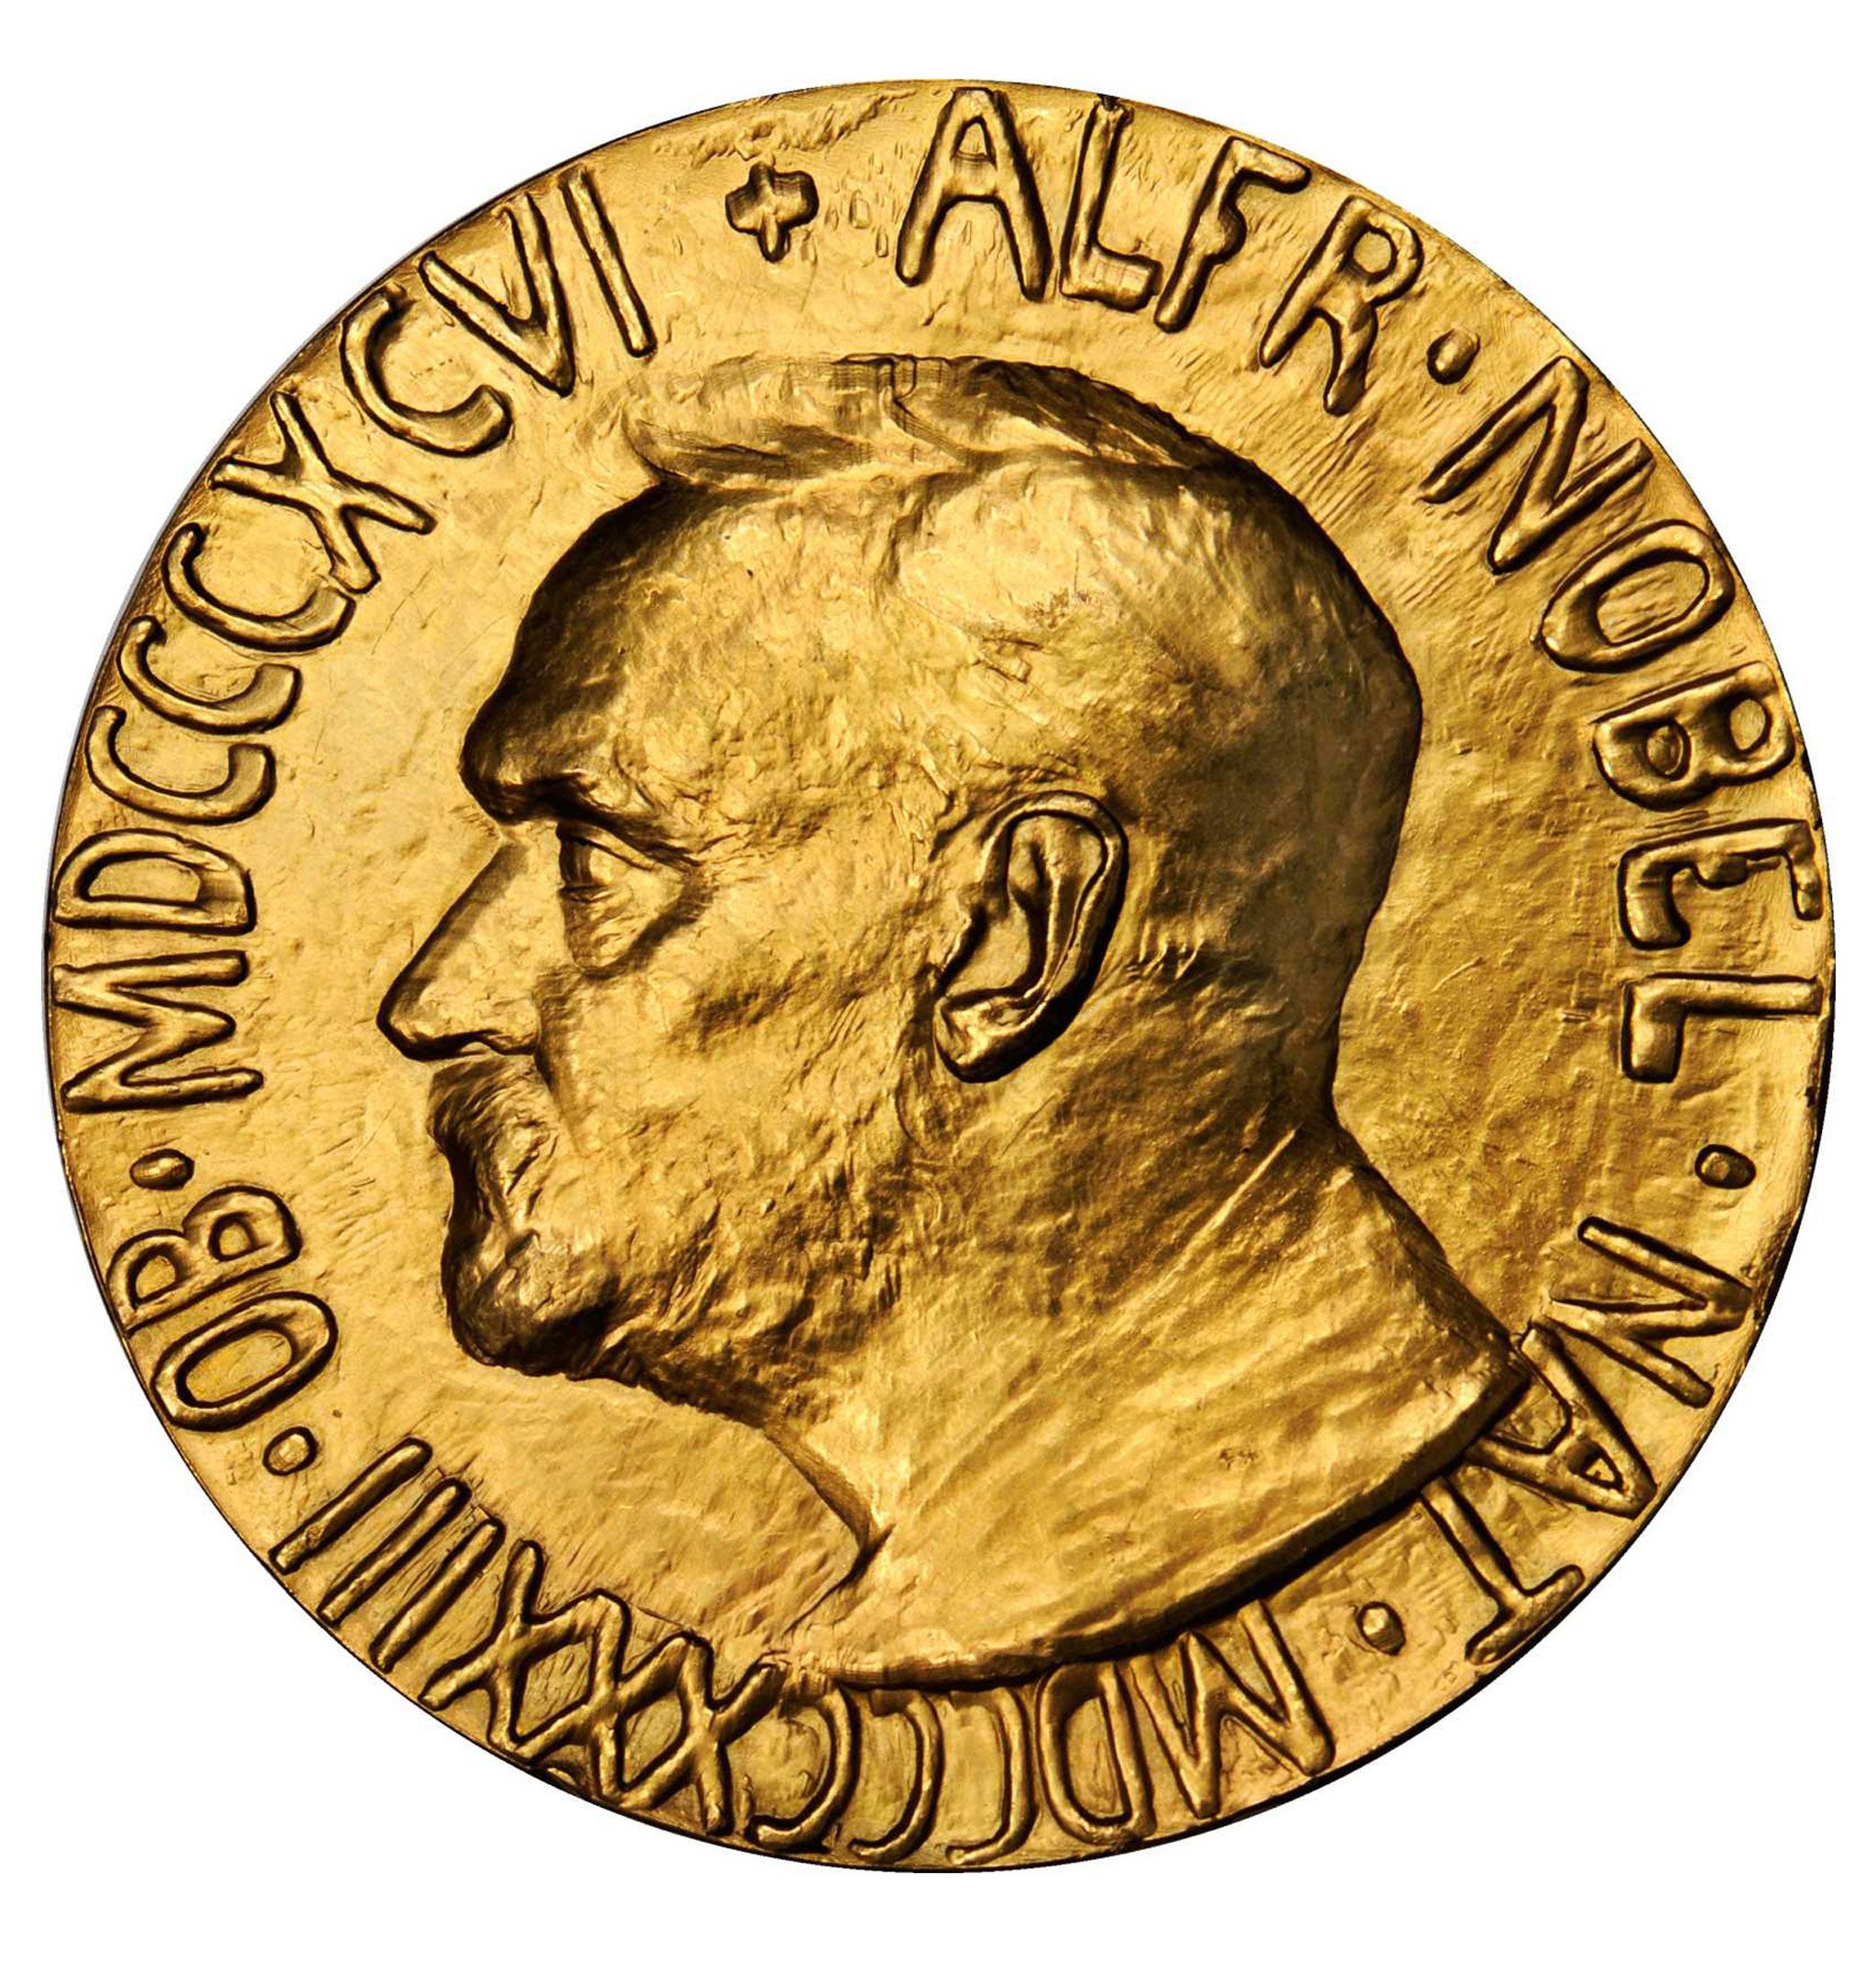 1936 Nobel Peace Prize medal to sell at auction after appearing in